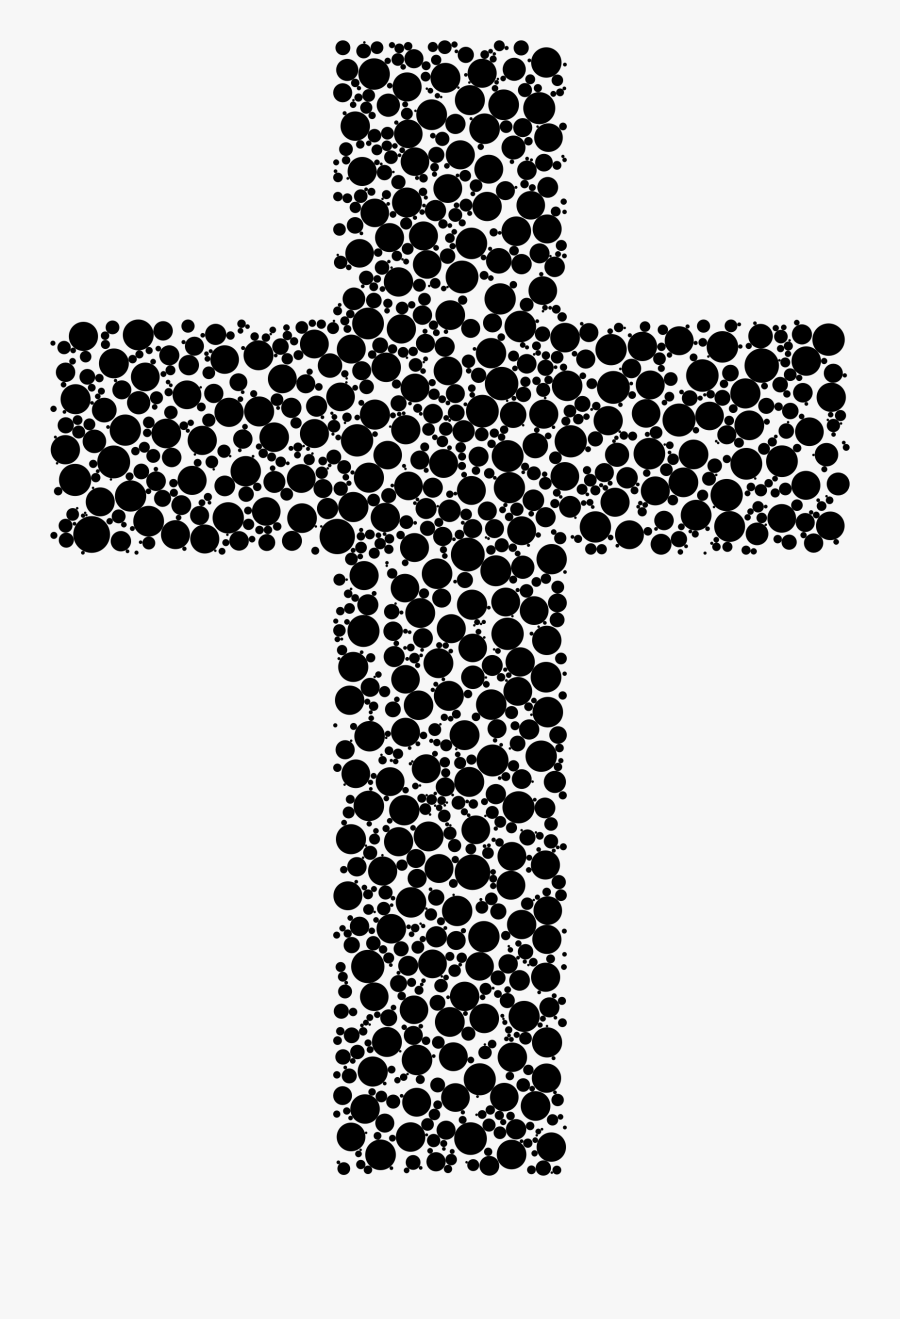 Cross Circles Black And White Download - Black And White Abstract Cross, Transparent Clipart